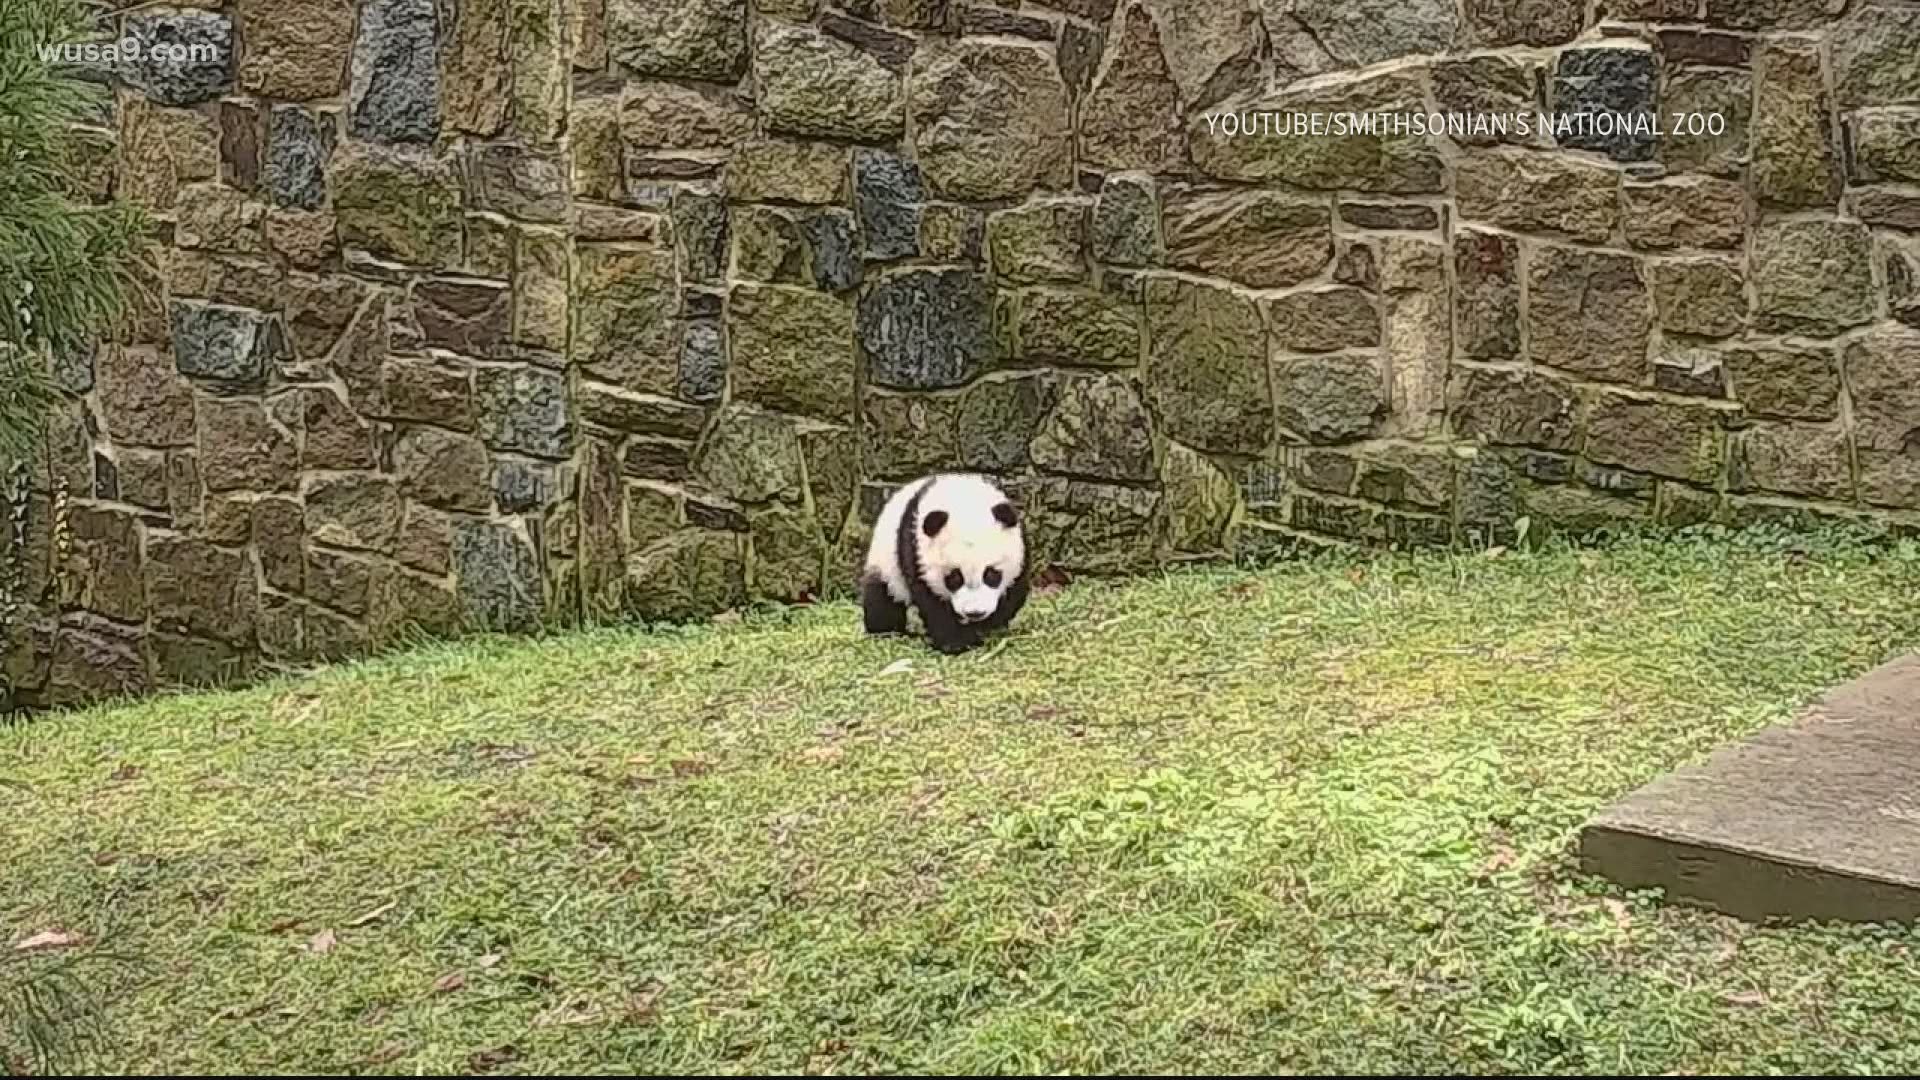 Just younger than 6 months old, giant panda cub Xiao Qi Ji has gone outside for the first time, with his mother, Mei Xiang.